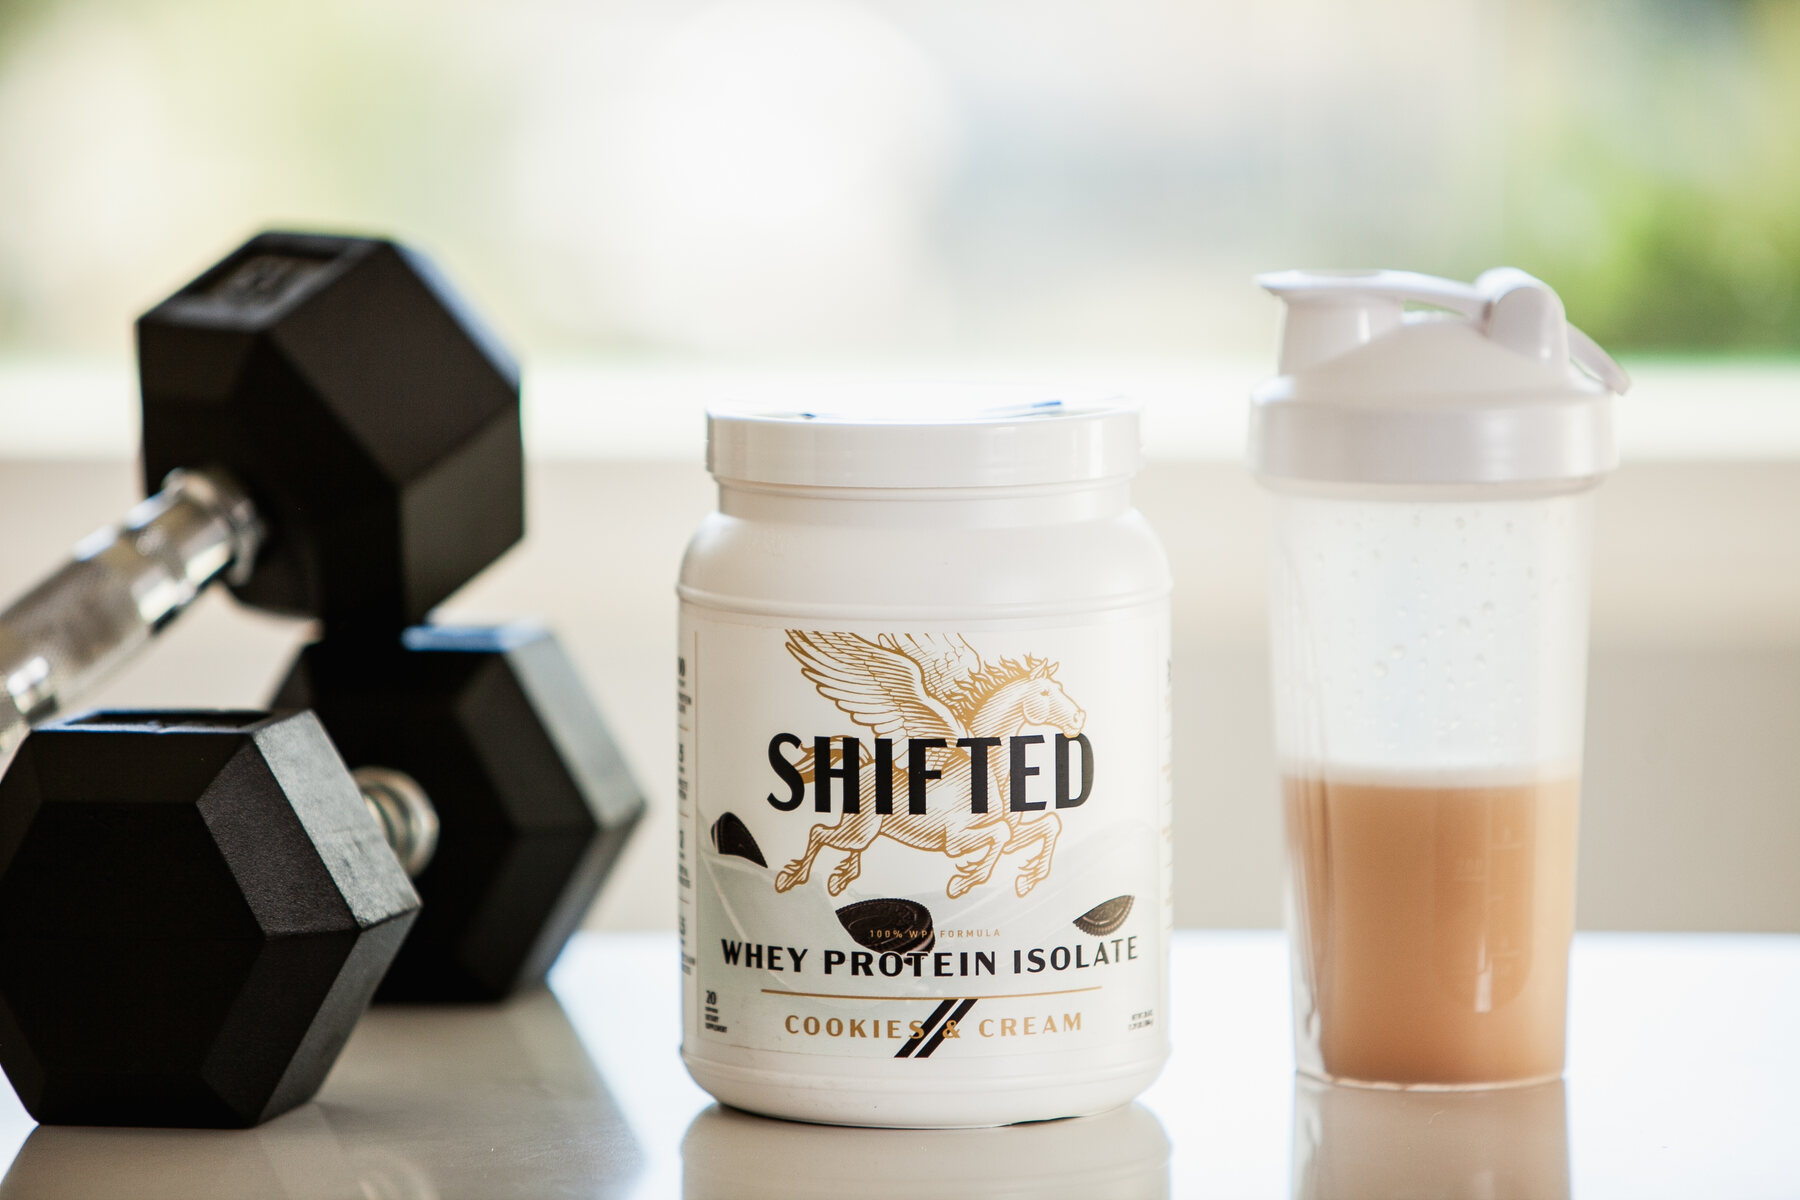 A container of Shifted whey protein isolate next to a pair of dumbbells and a bottle blender filled with a protein drink